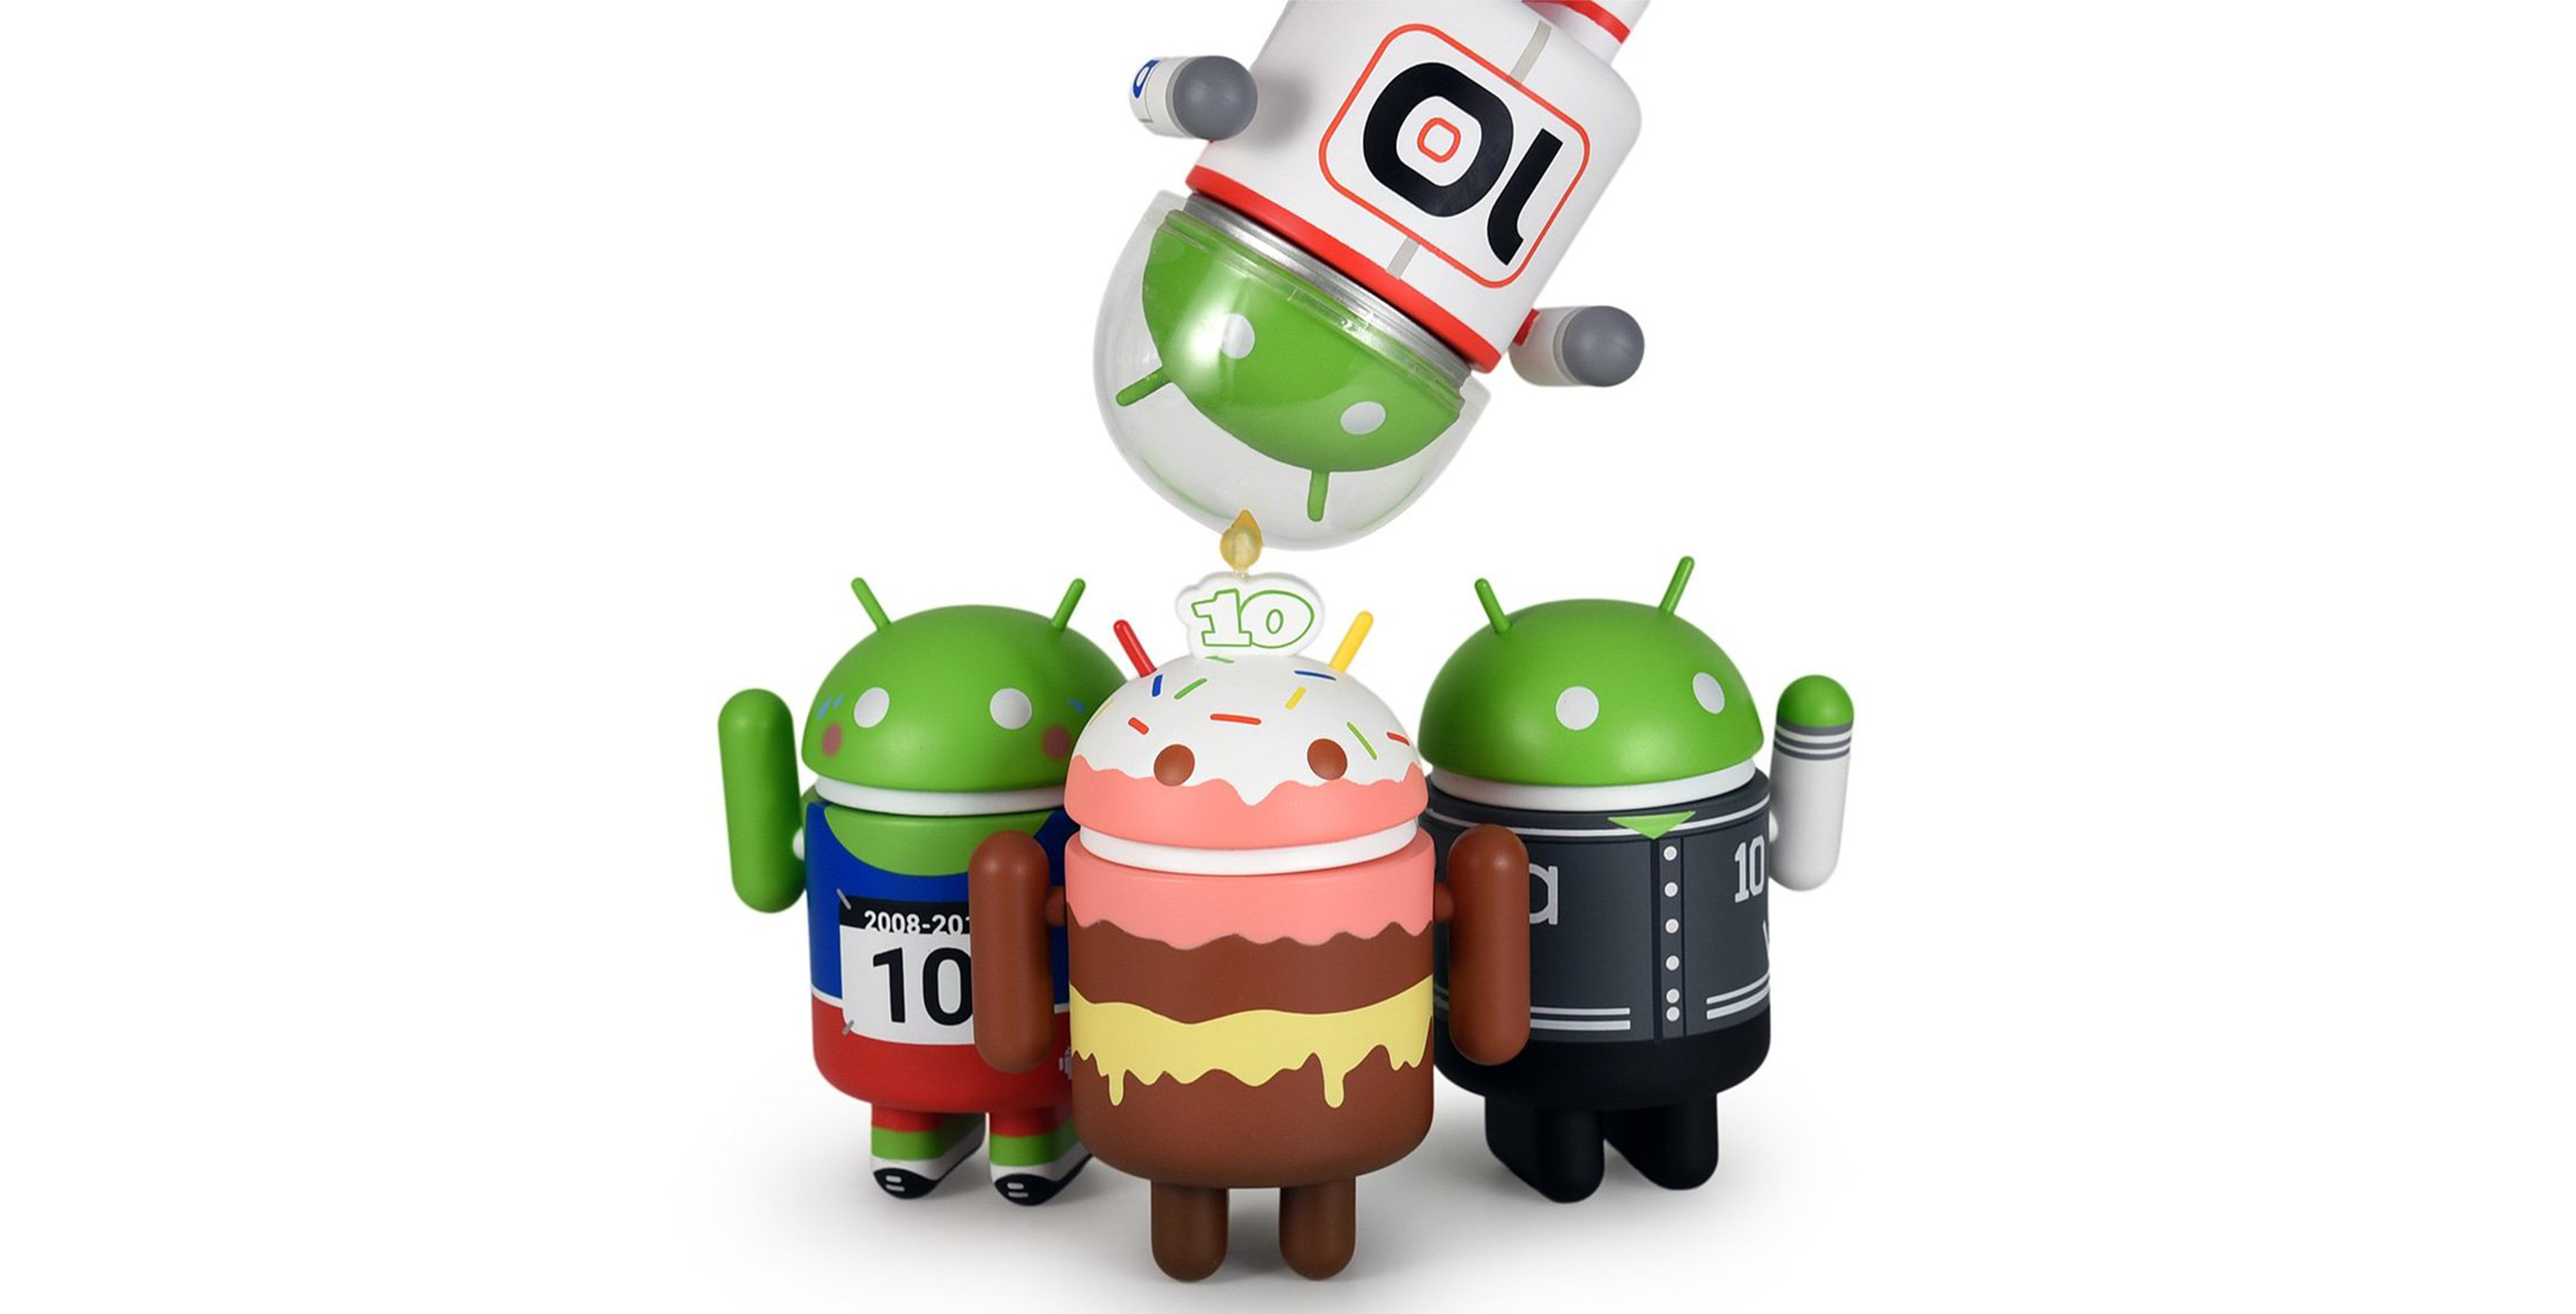 Android 10th birthday figures